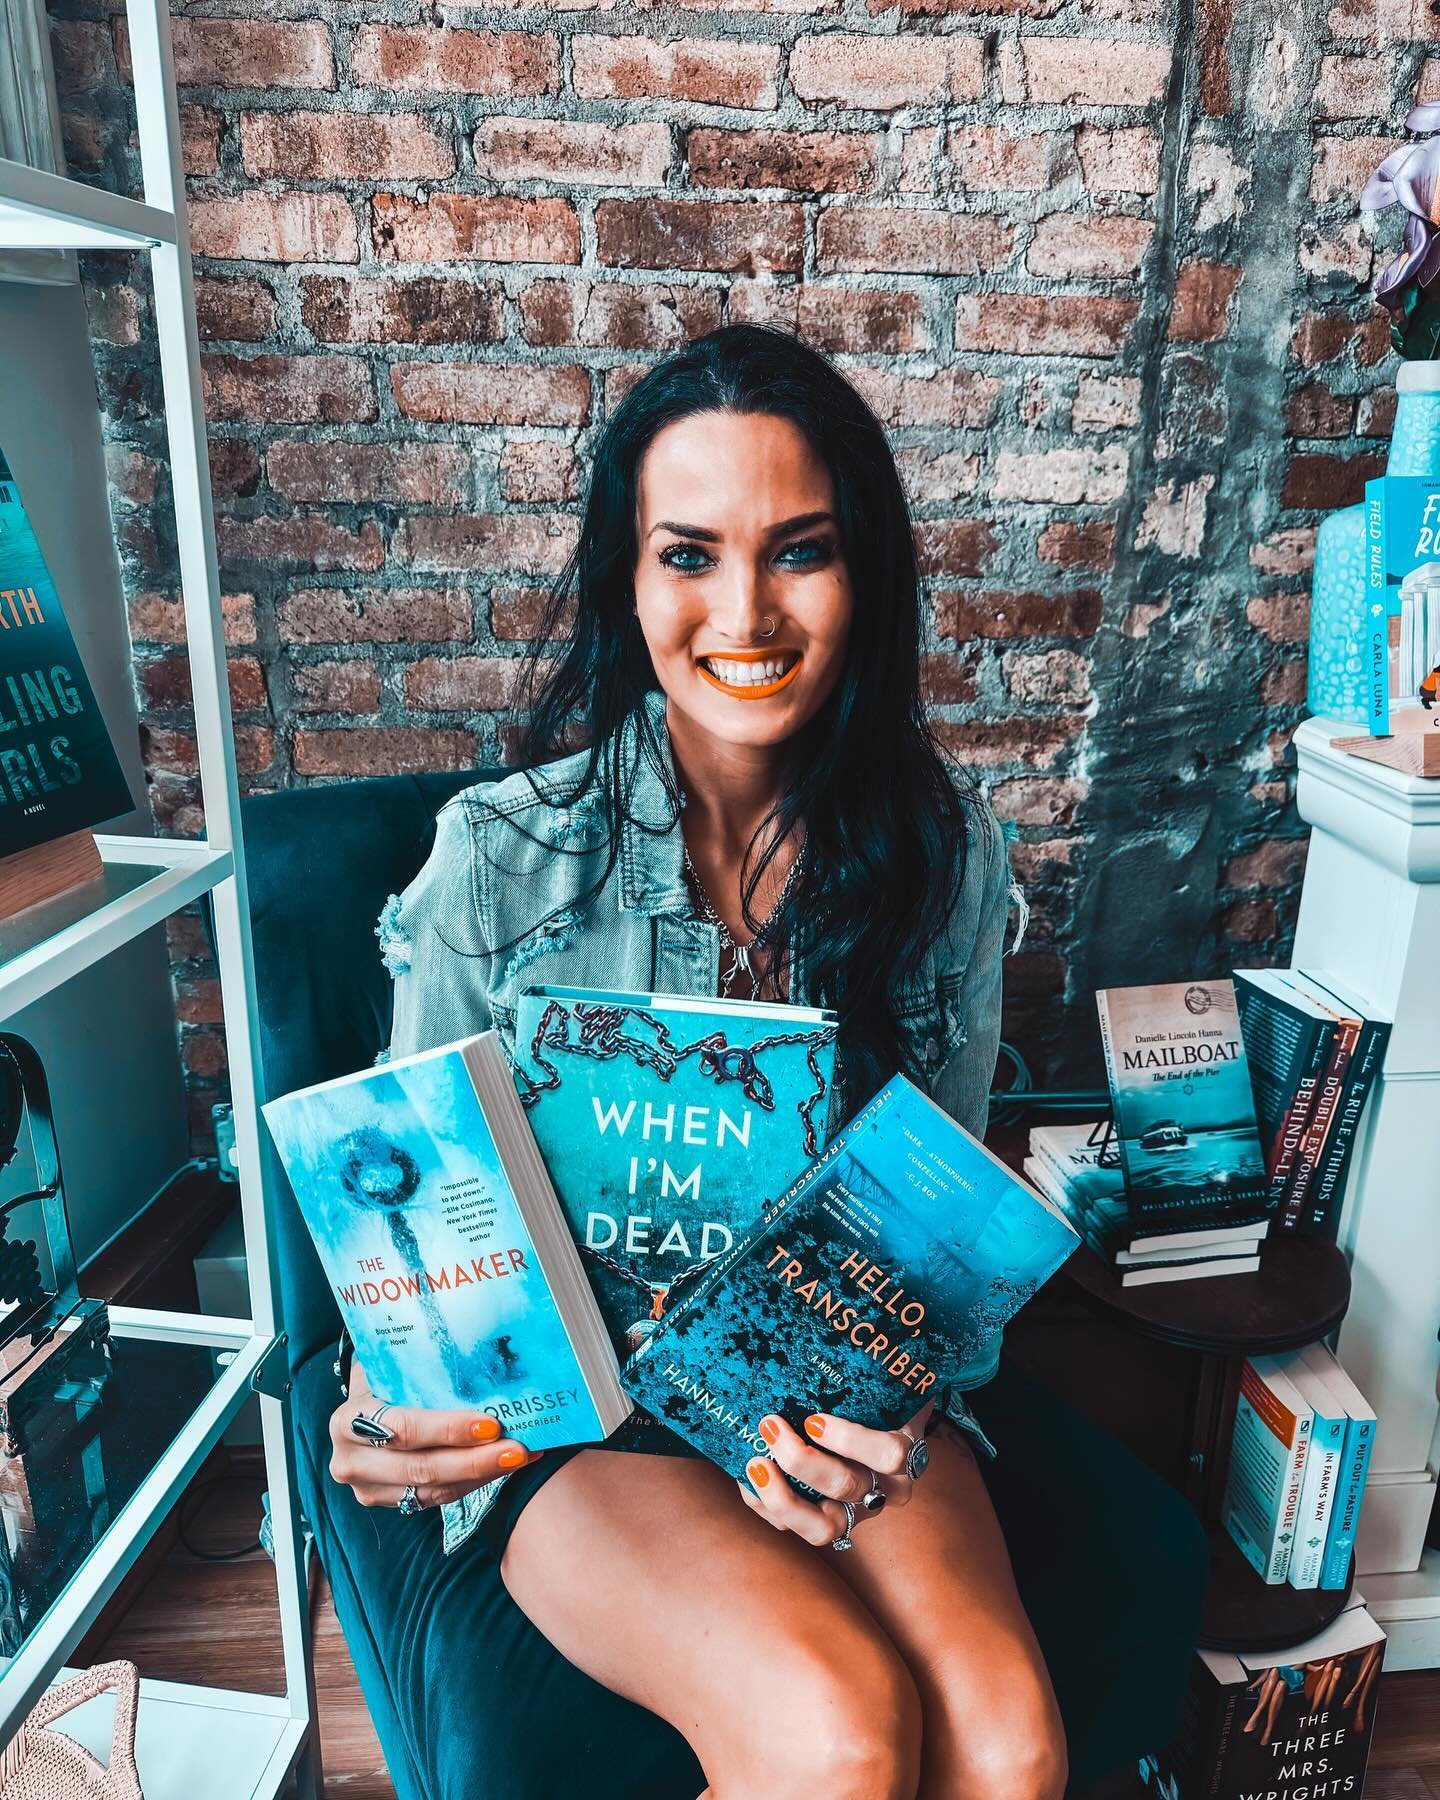 Happy Indie Bookstore Day 🎈
⠀⠀⠀⠀⠀⠀⠀⠀⠀
Loved celebrating at my fave local bookstore Blue House Books @bhbkenosha with fellow cool person
@erin_nach ✨
⠀⠀⠀⠀⠀⠀⠀⠀⠀
Not only are independent bookstores great supporters of the local economy, they are some o